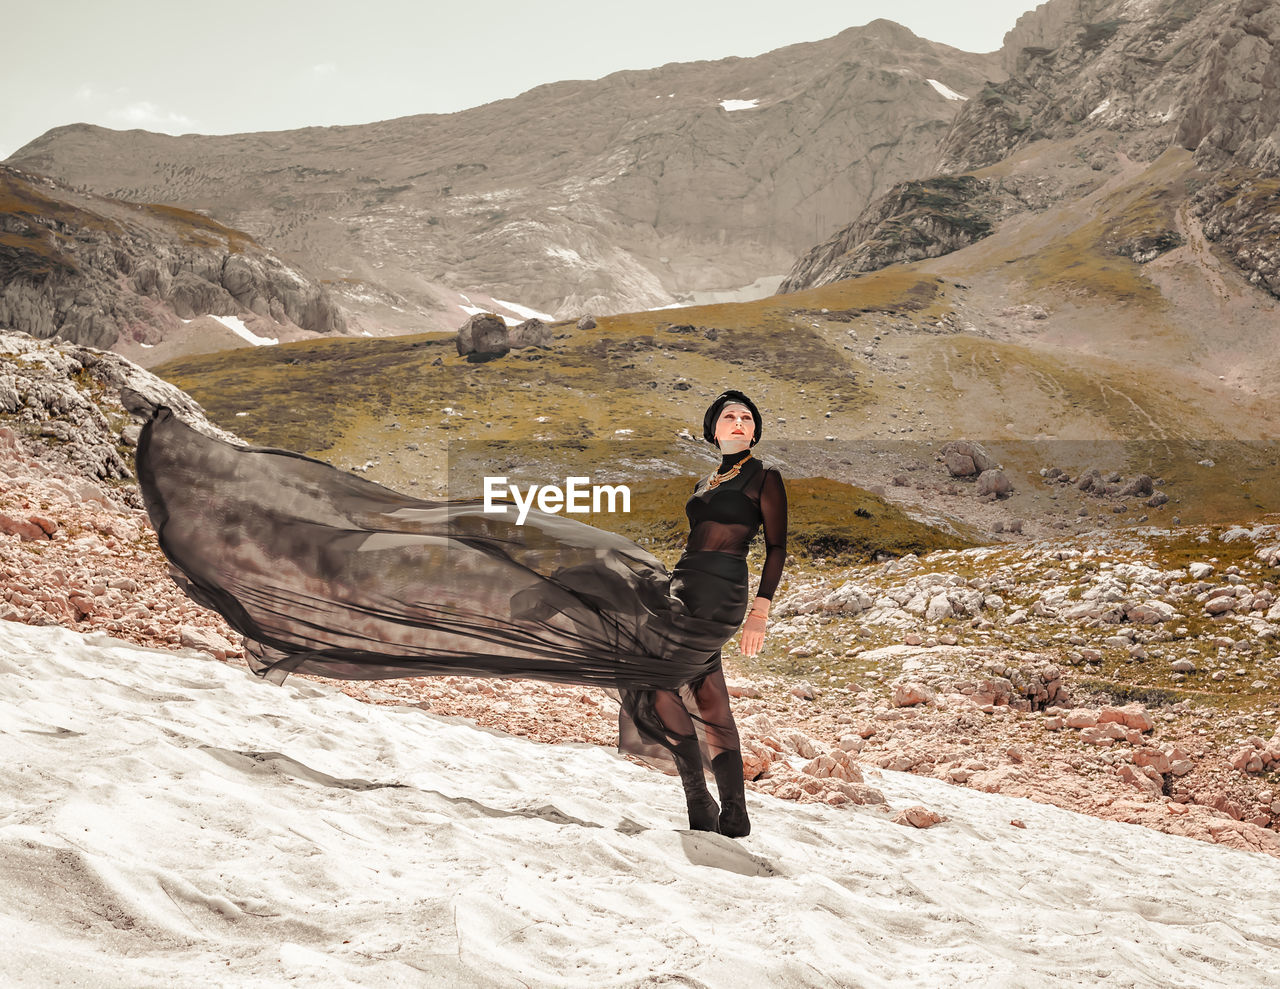 A stylish determined woman in a black dress fluttering in the wind stands on the snow glacier